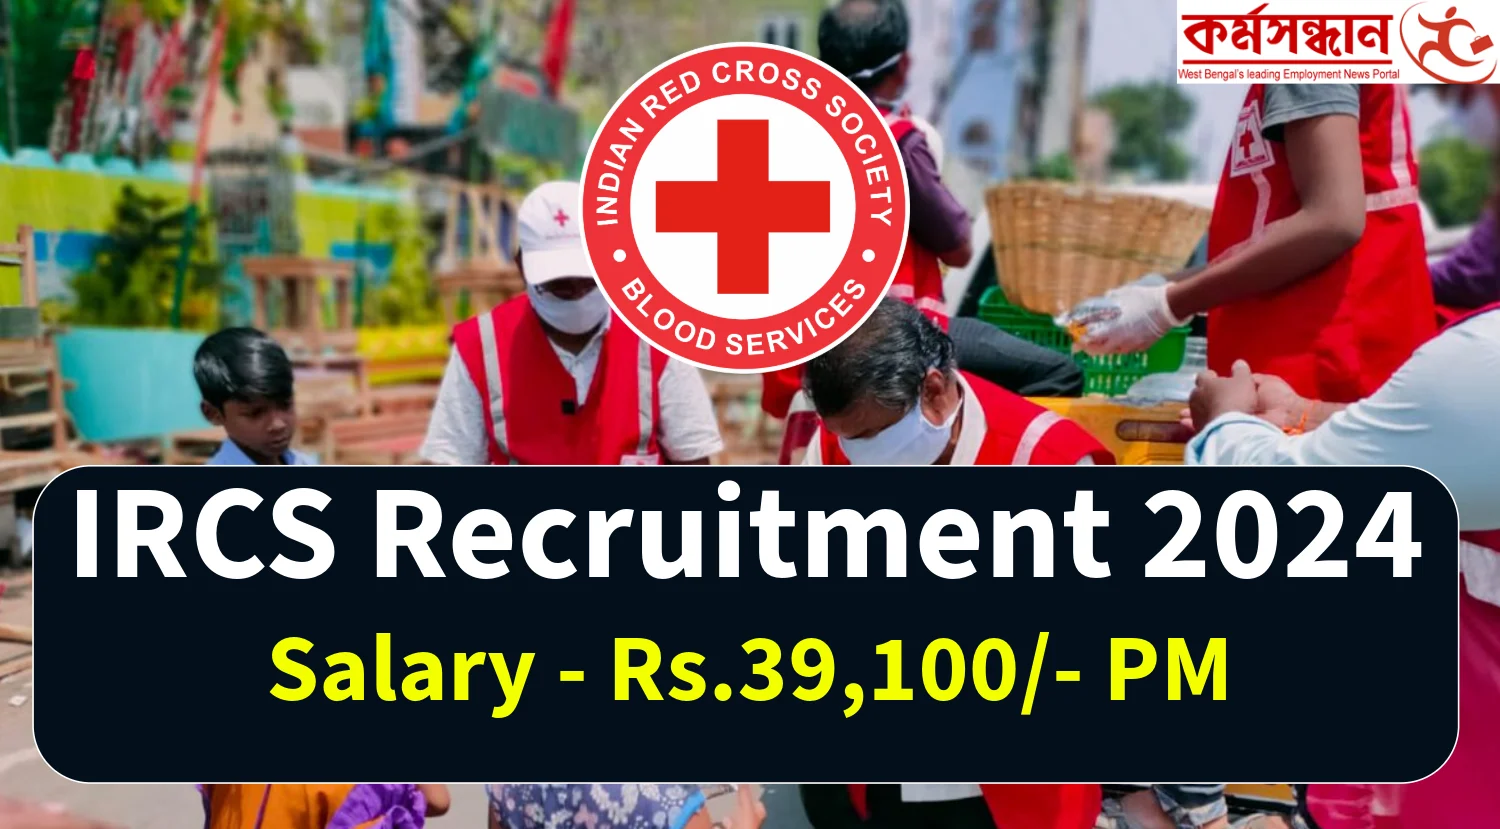 IRCS Recruitment 2024 Notification out, Eligibility Criteria and How to Apply